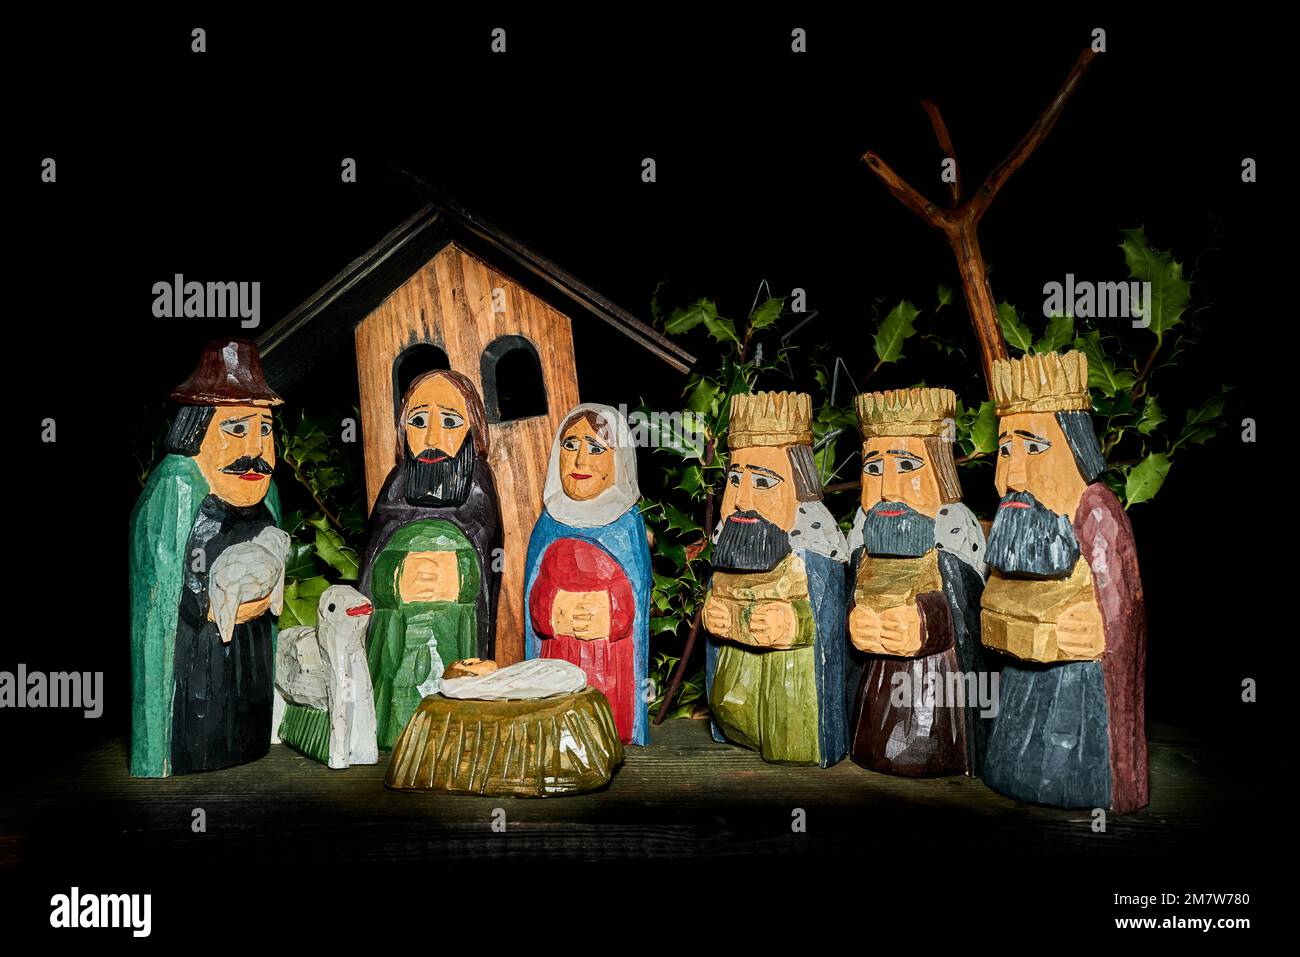 Crib - of a shepherd holding a lamb, and three magi holding gold frankincense and myrrh, gifts for the new-born Jesus Christ, son of Mary and Joseph. Stock Photo